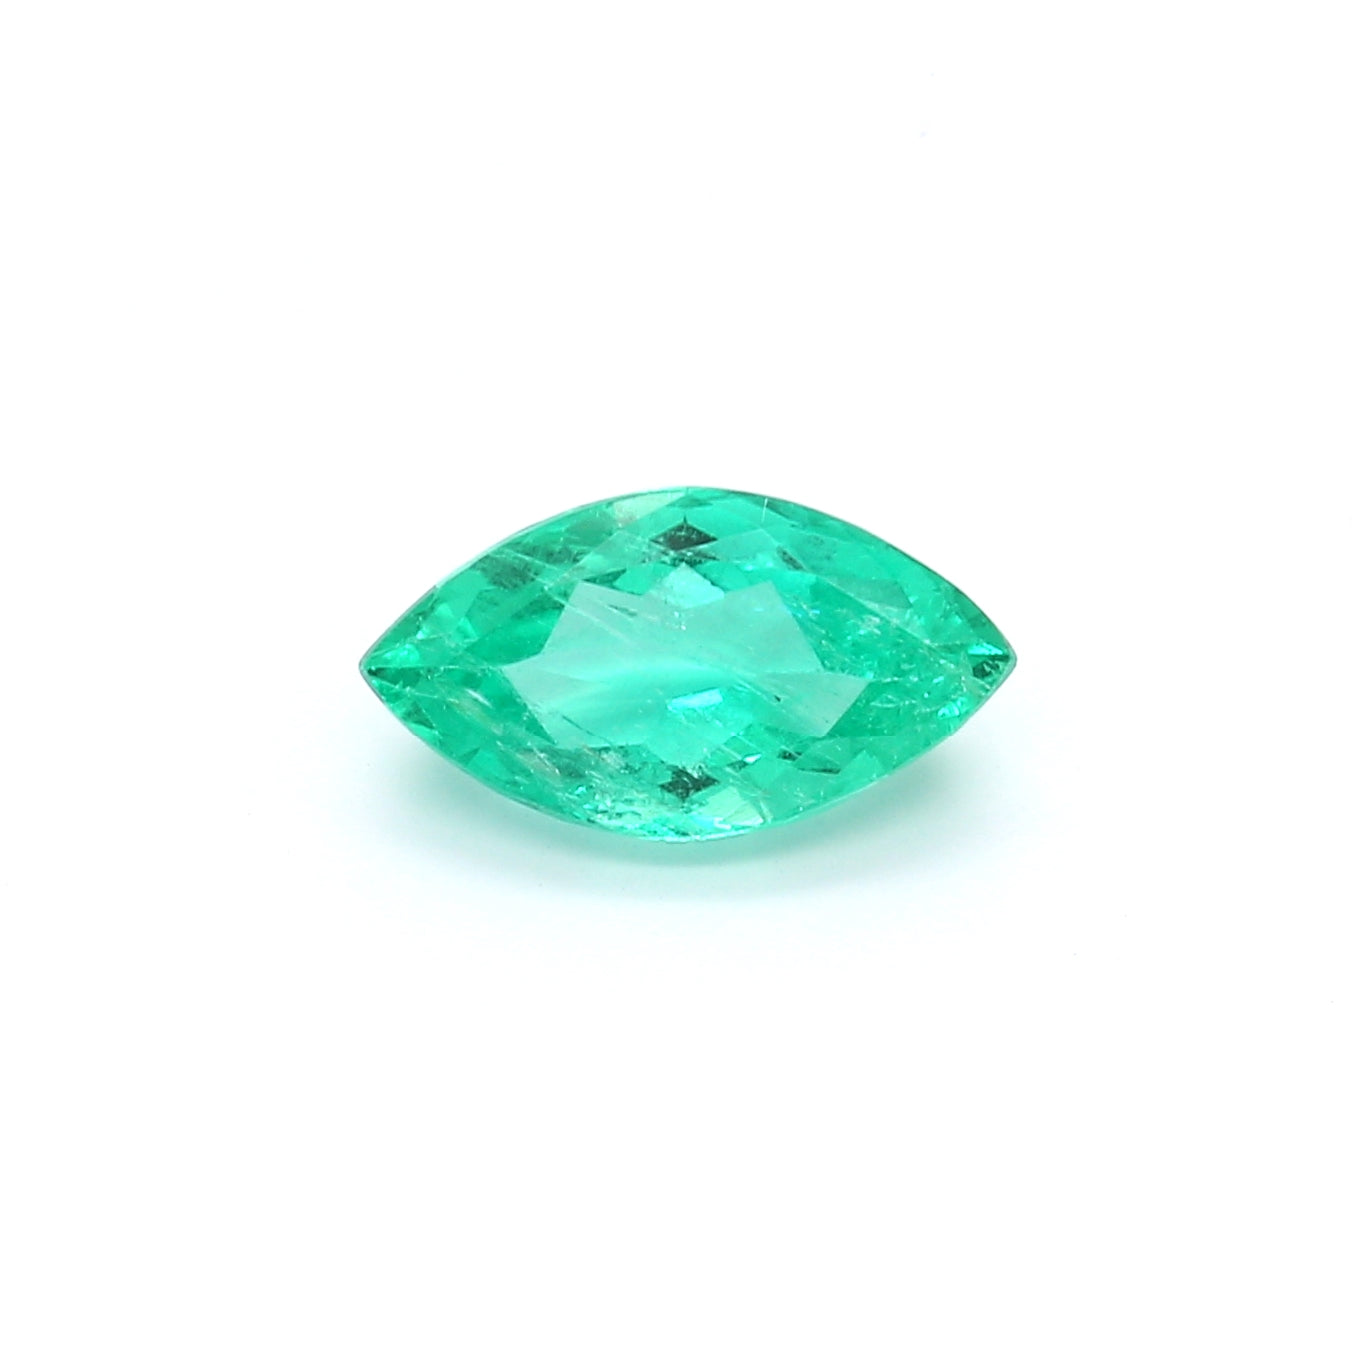 1.77ct Marquise Emerald, Moderate Oil, Russia - 11.56 x 6.27 x 4.47mm